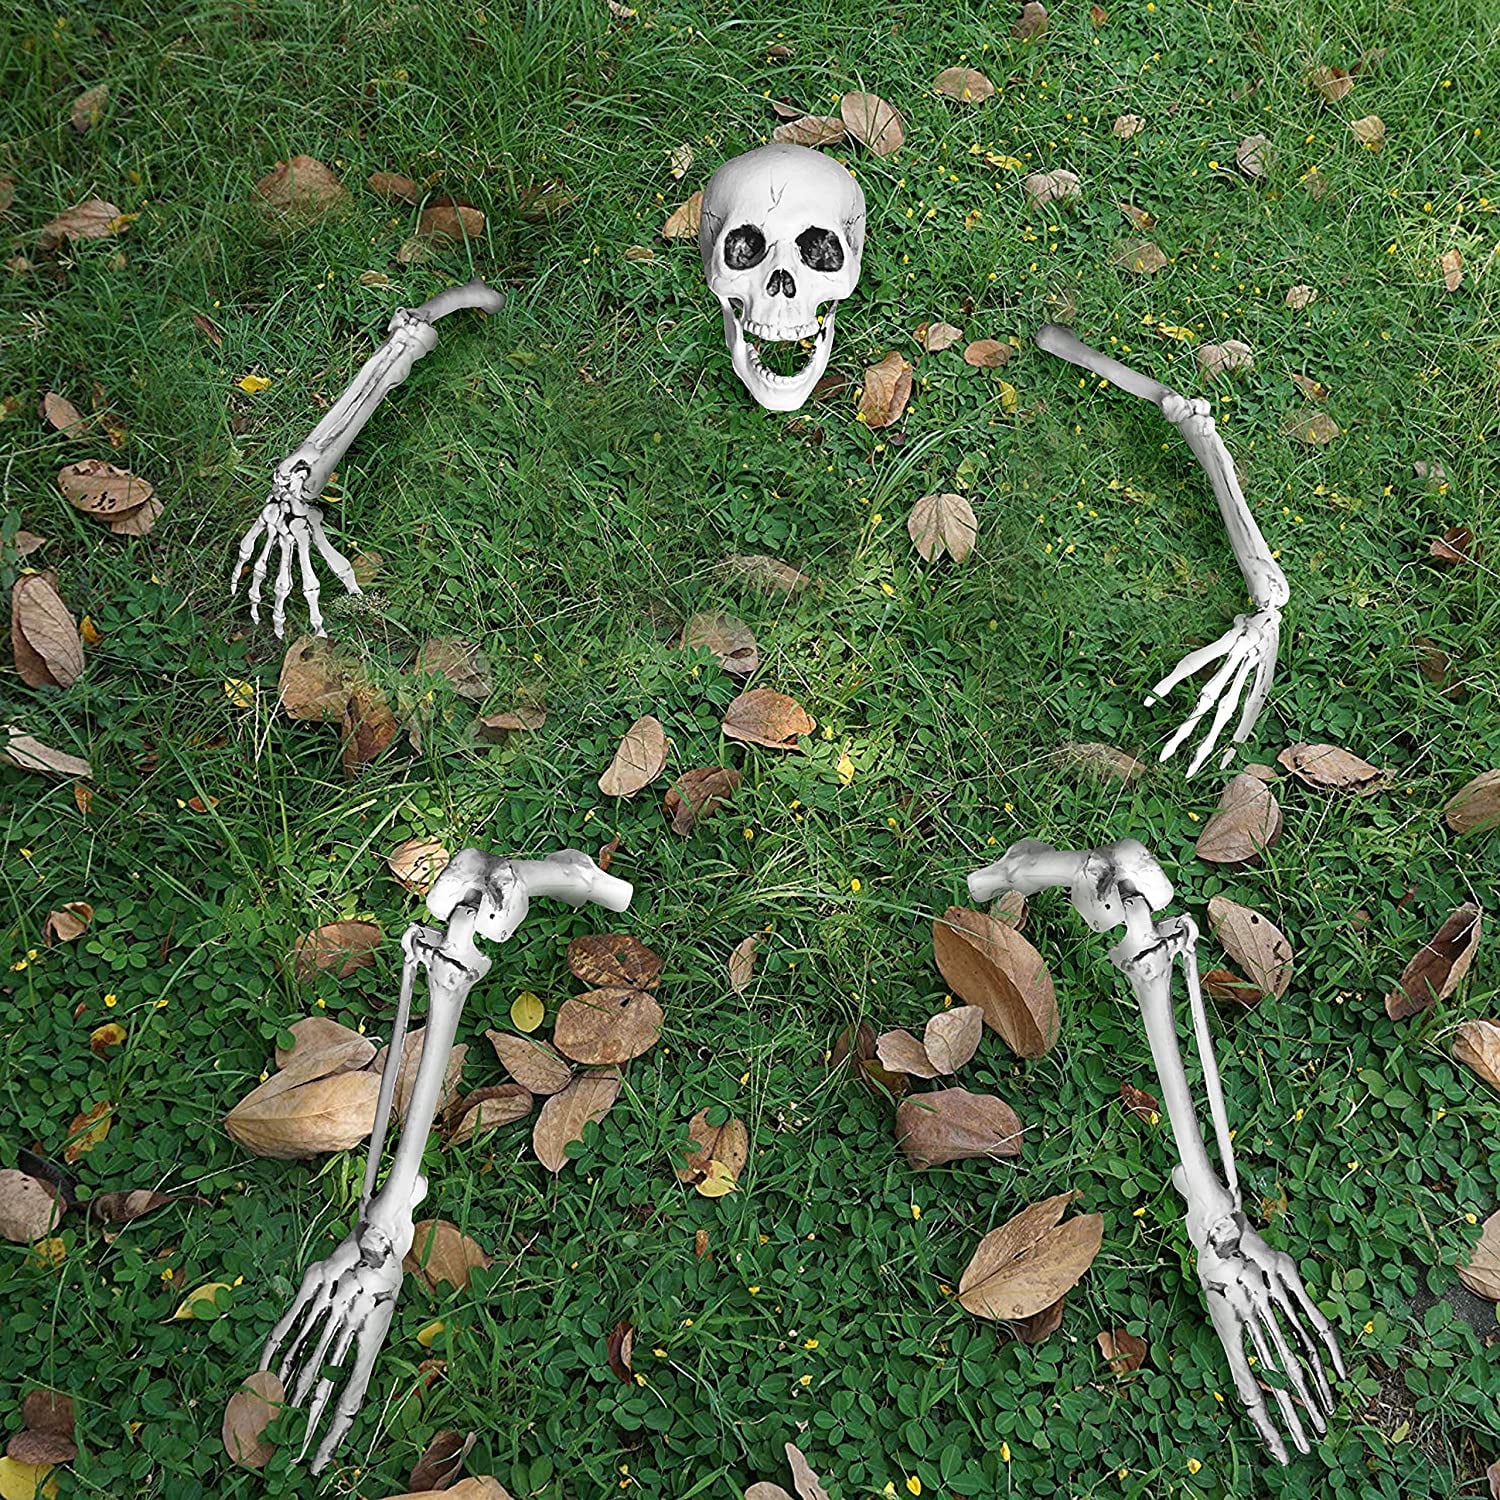 Yard Lawn Stakes Decorations Max Fun Realistic Looking Skeleton Stakes Halloween Decorations for Garden